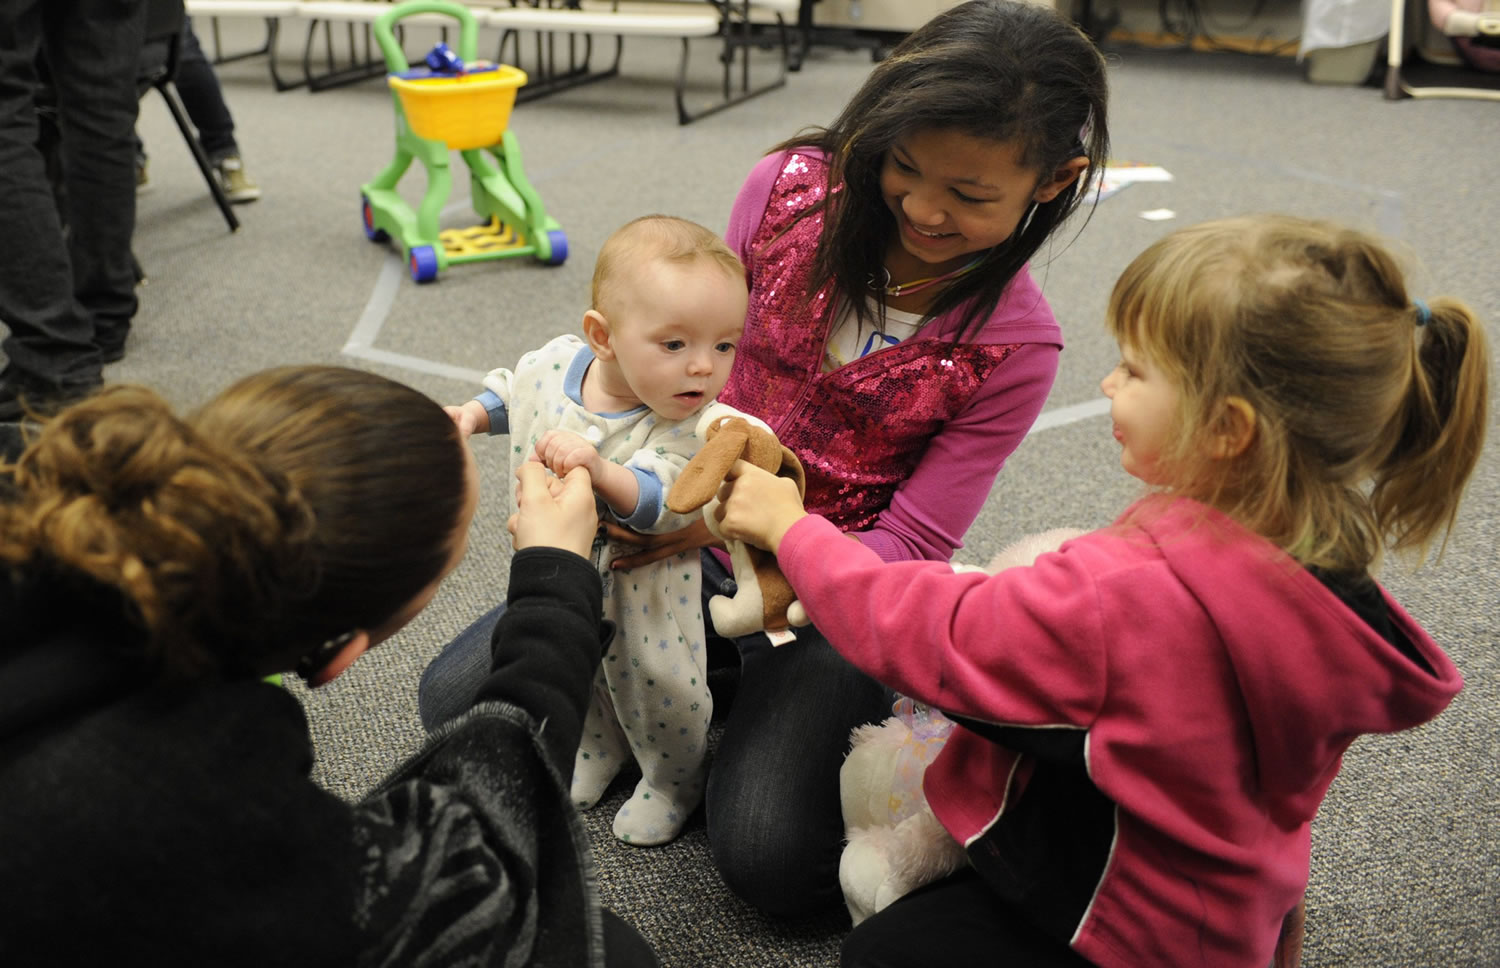 Four-month-old Zylander Studer is the center of attention for Mai Truong, center, Madelyn Ackerman, right, and mom Querida Yerkes, left, during a Second Step parenting class.